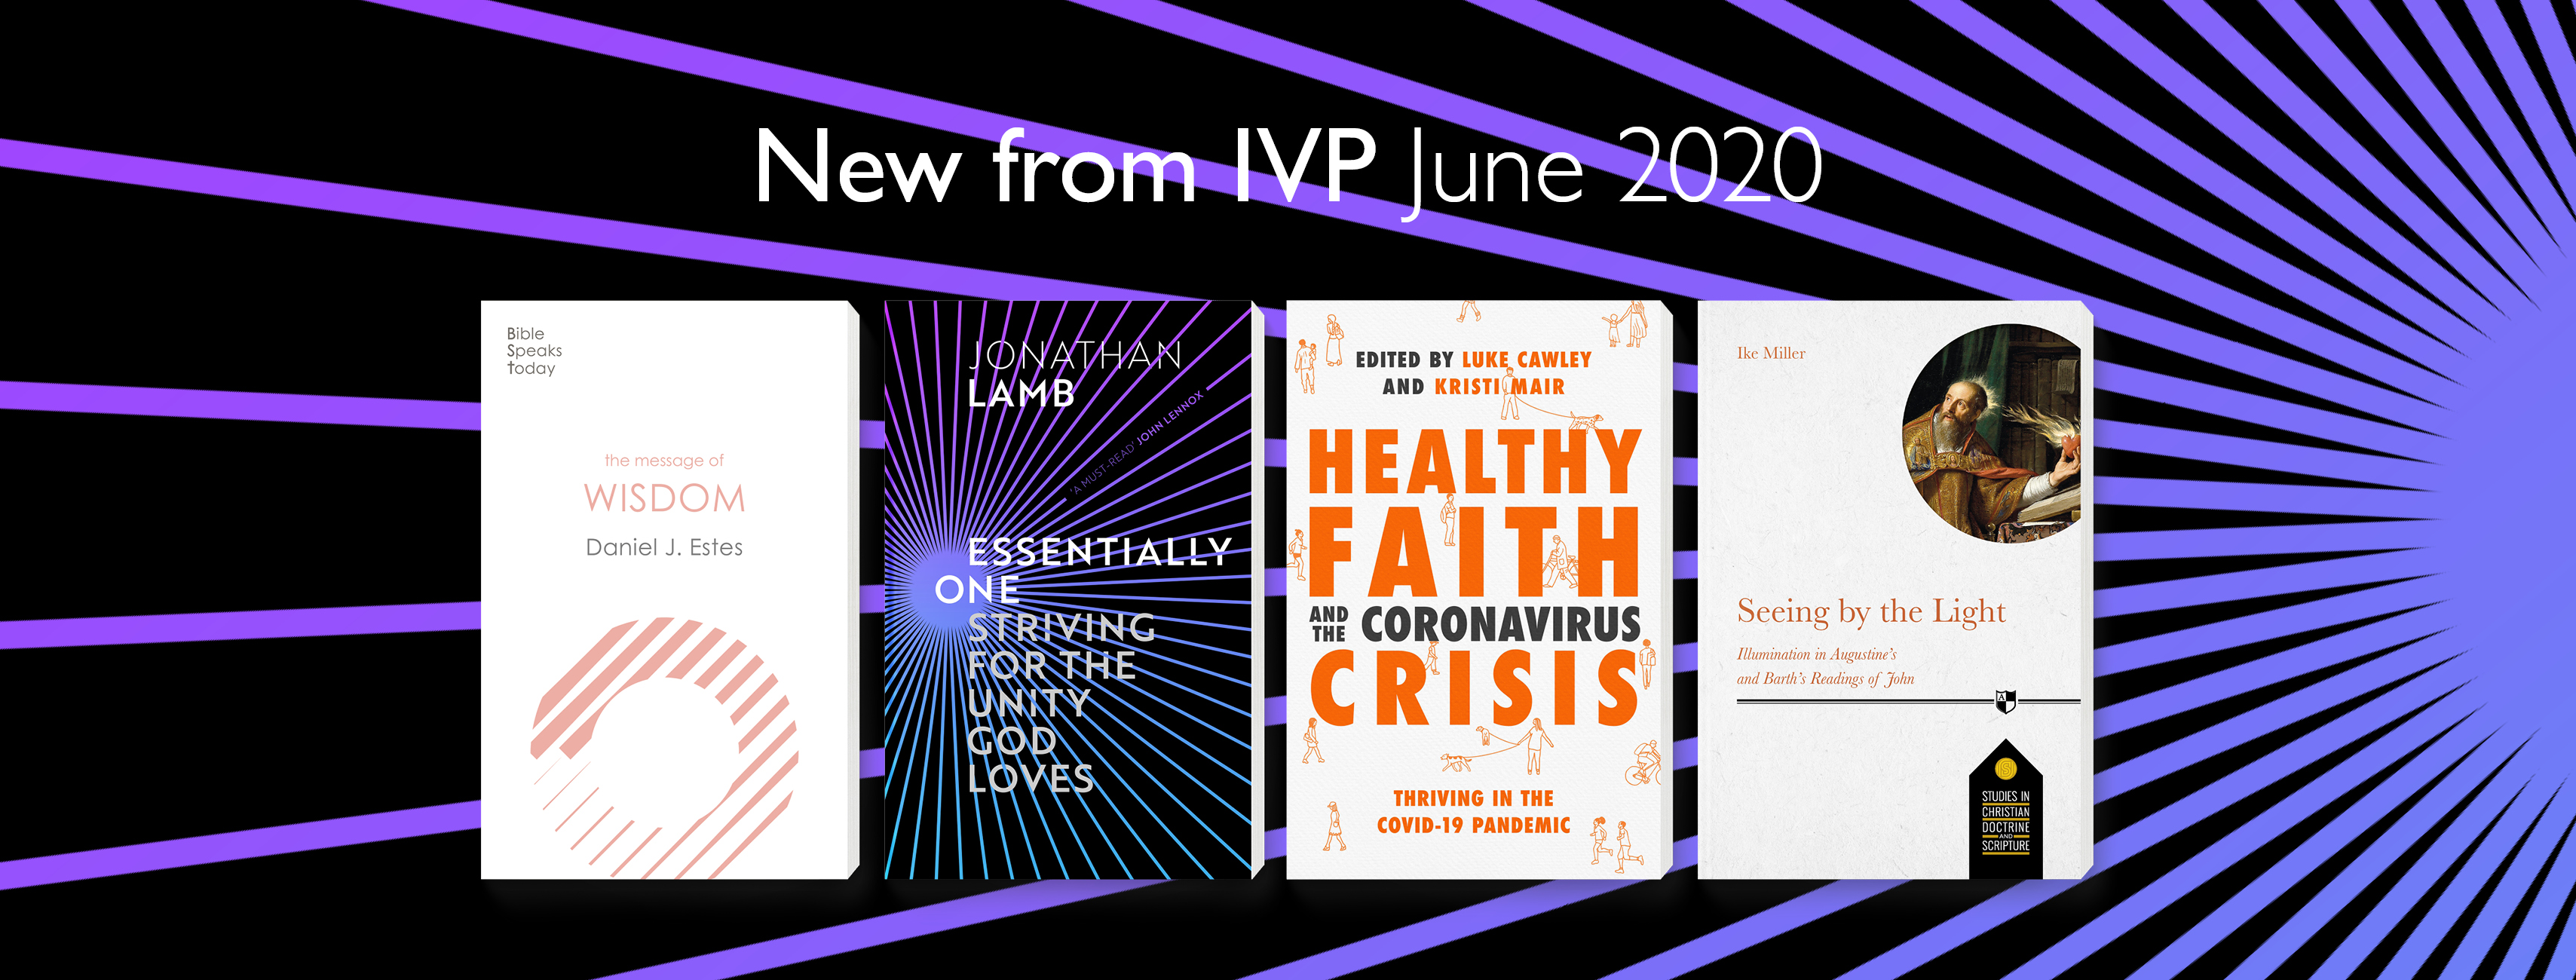 The IVP June 2020 Releases